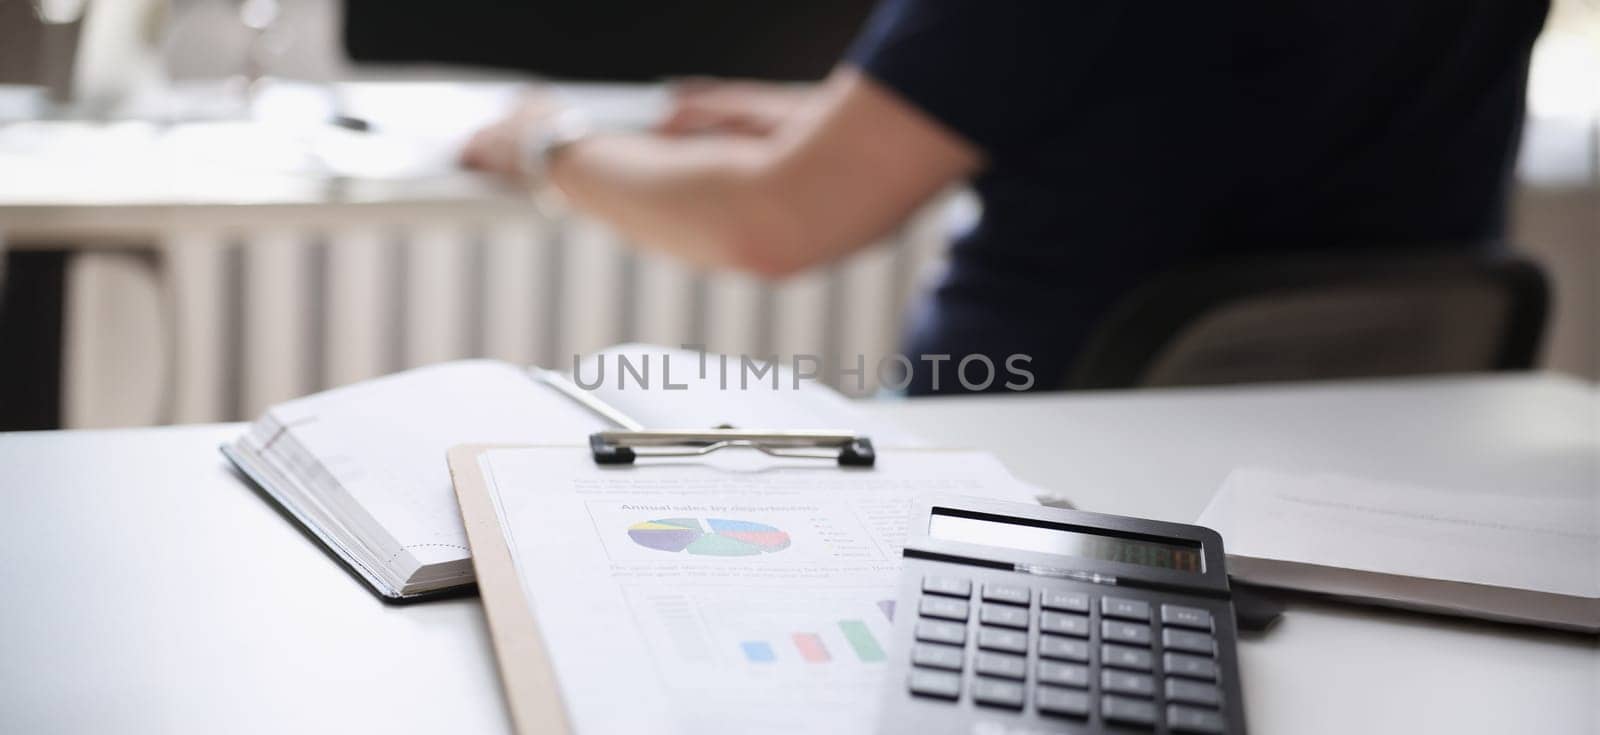 calculator paper document notebook lie on table office